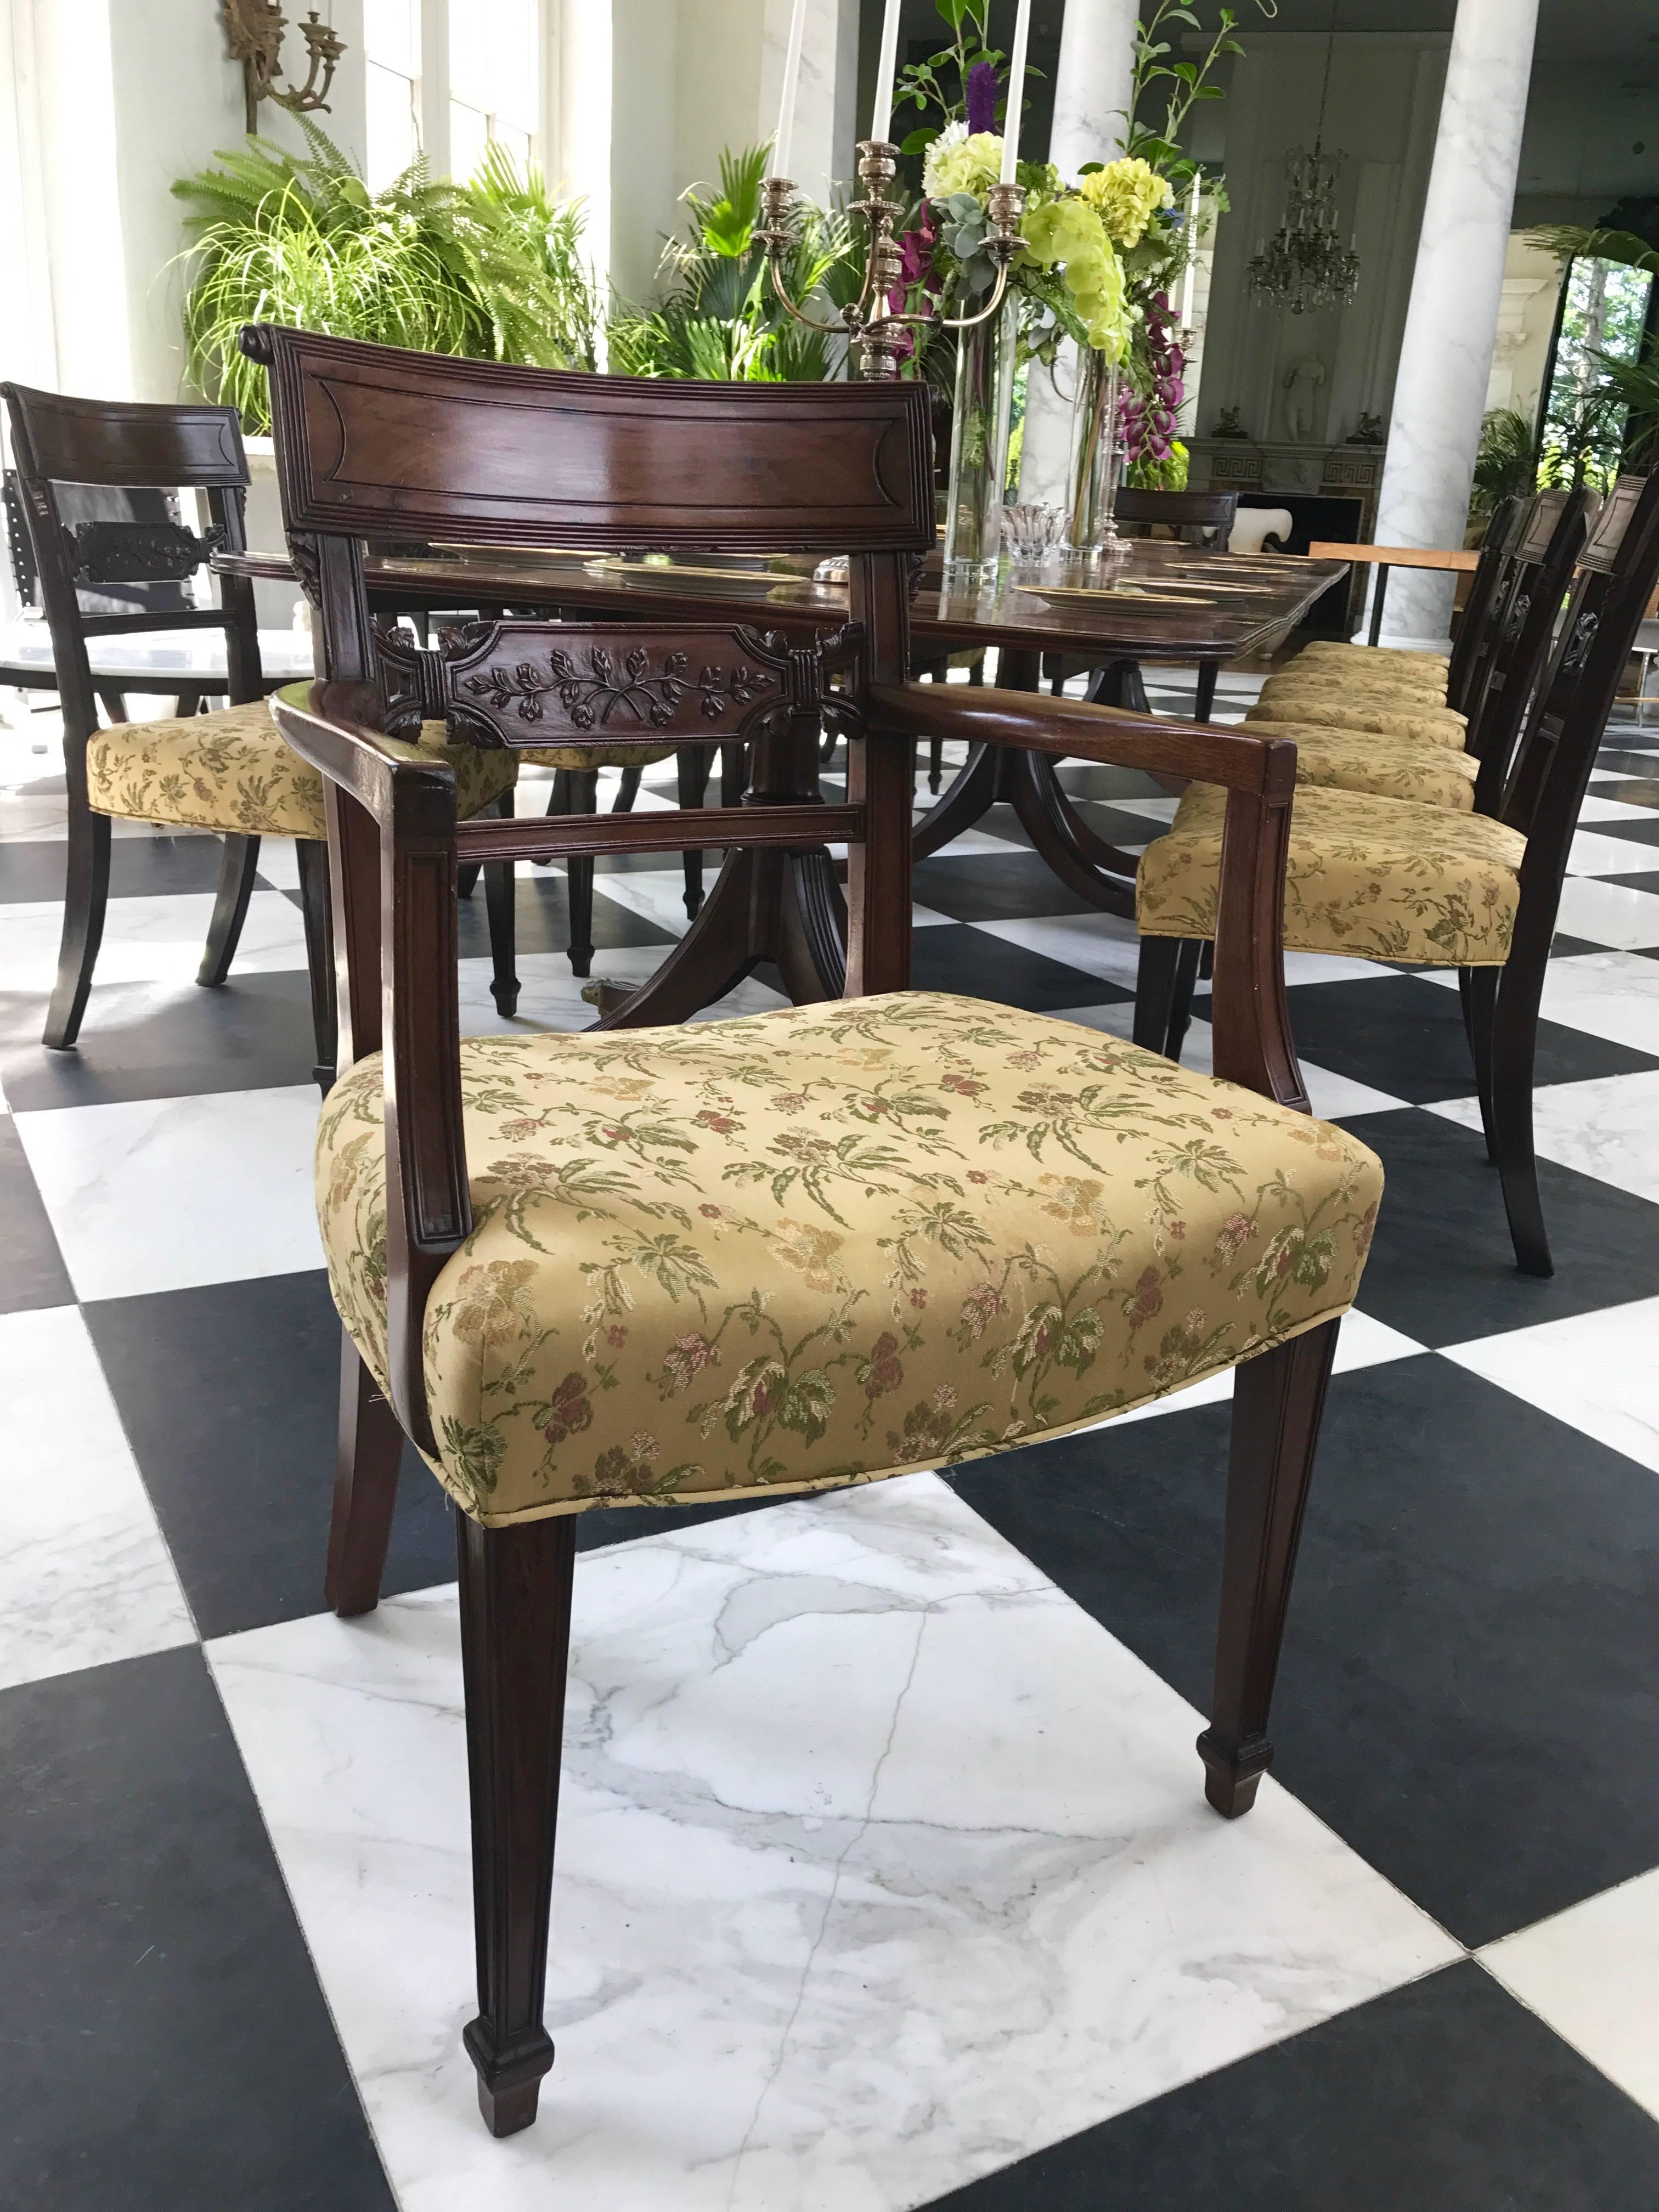 This gorgeous Set of 12 Regency period Dining Chairs has incredibly detailed hand carved backs of foliate design. 
They are made of the finest mahogany, Cuban mahogany, deep and rich in color.
The legs are tapered with reeding on the edges. 
There